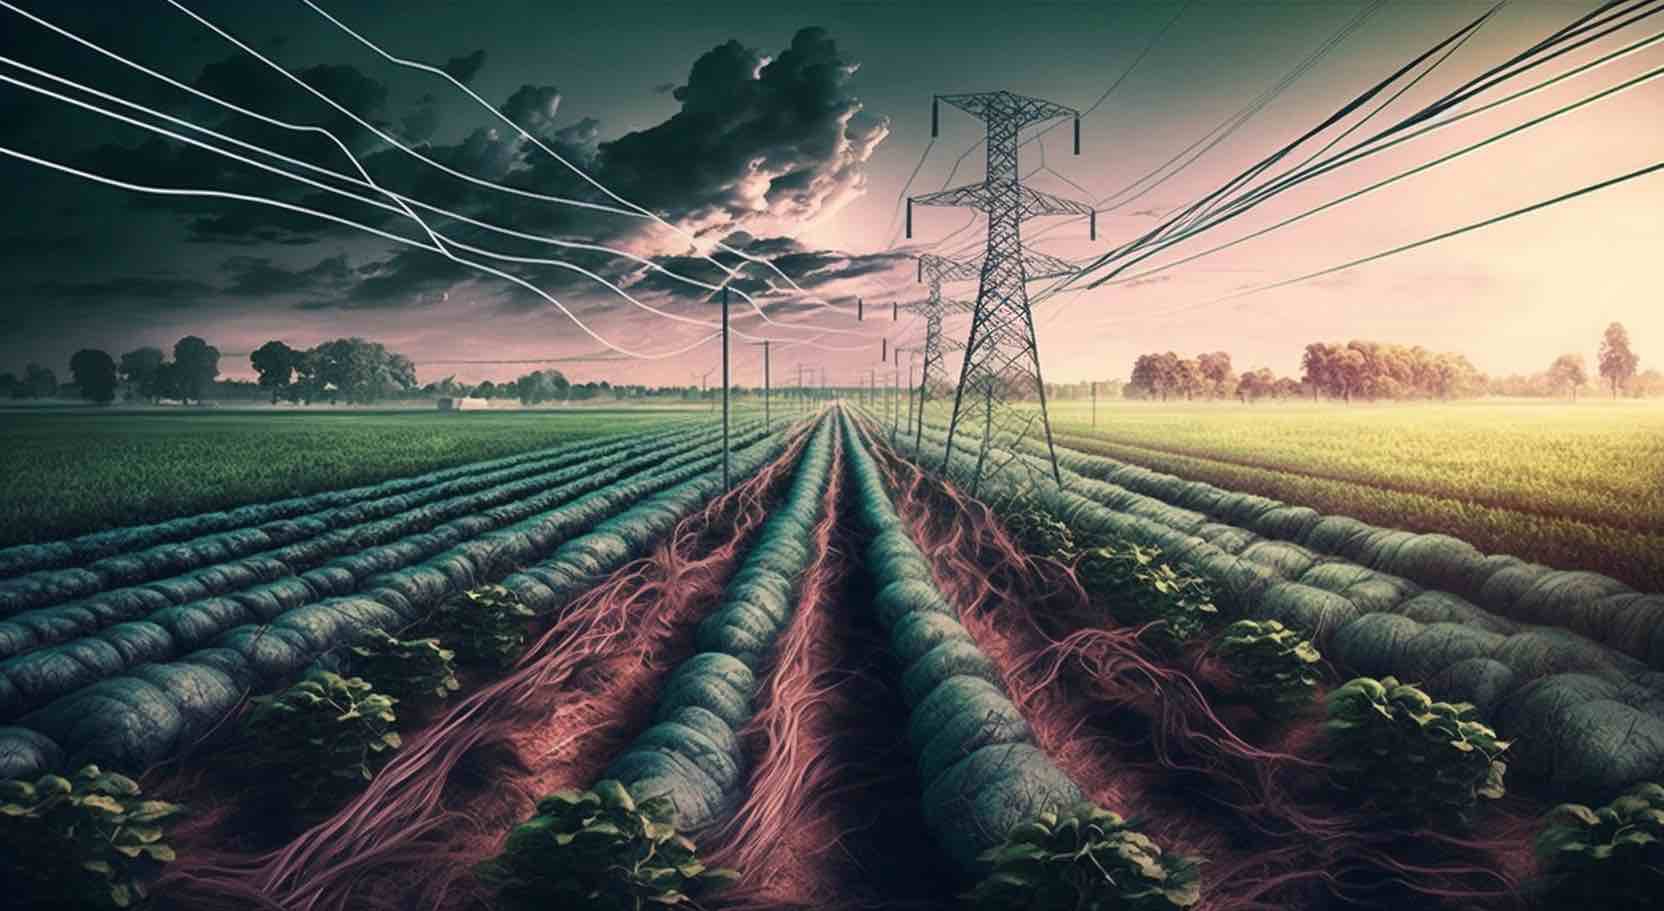 Electro Culture Farming: A Revolutionary Method for Increased Yields and Sustainability?